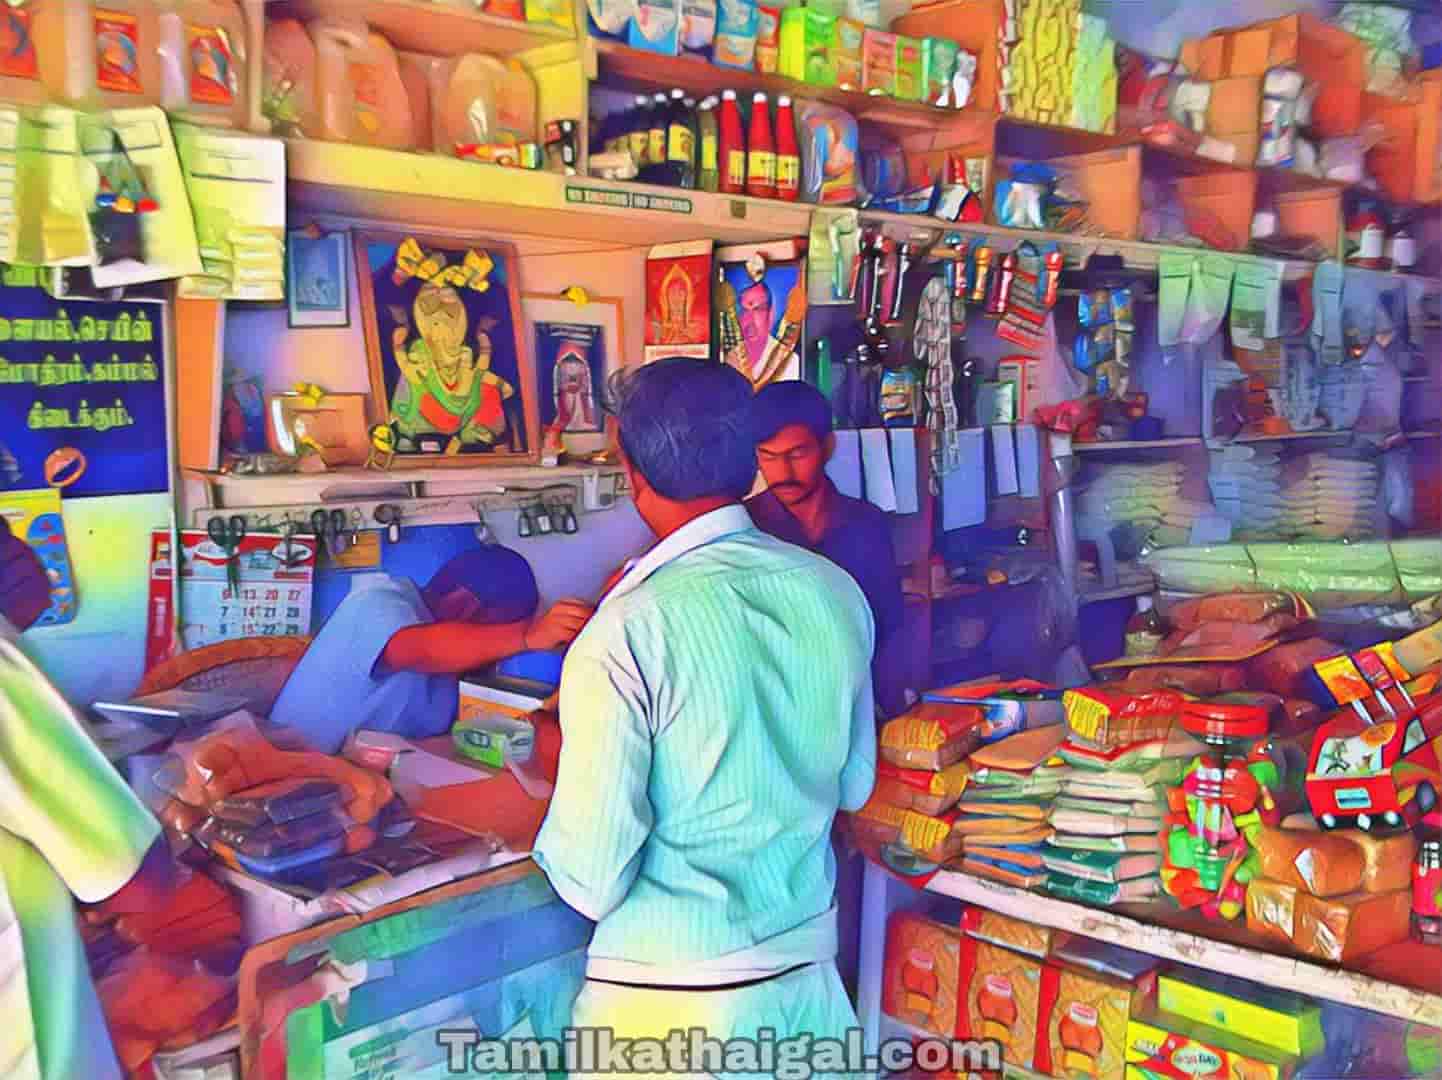 Grocery store tamil kathaigal 1